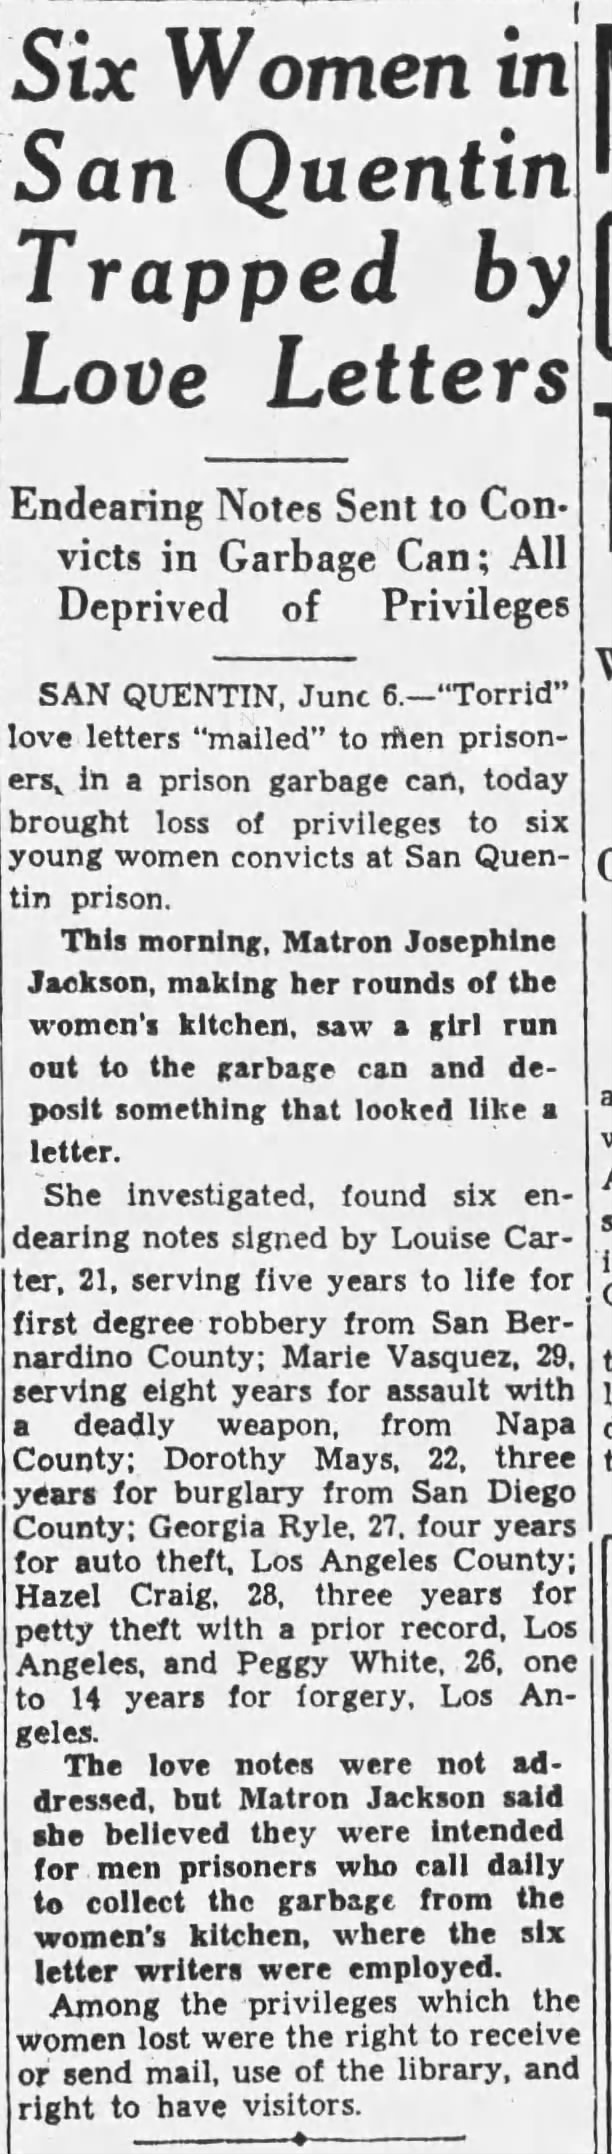 1933-06-06 San Quentin women send love letters in garbage cans